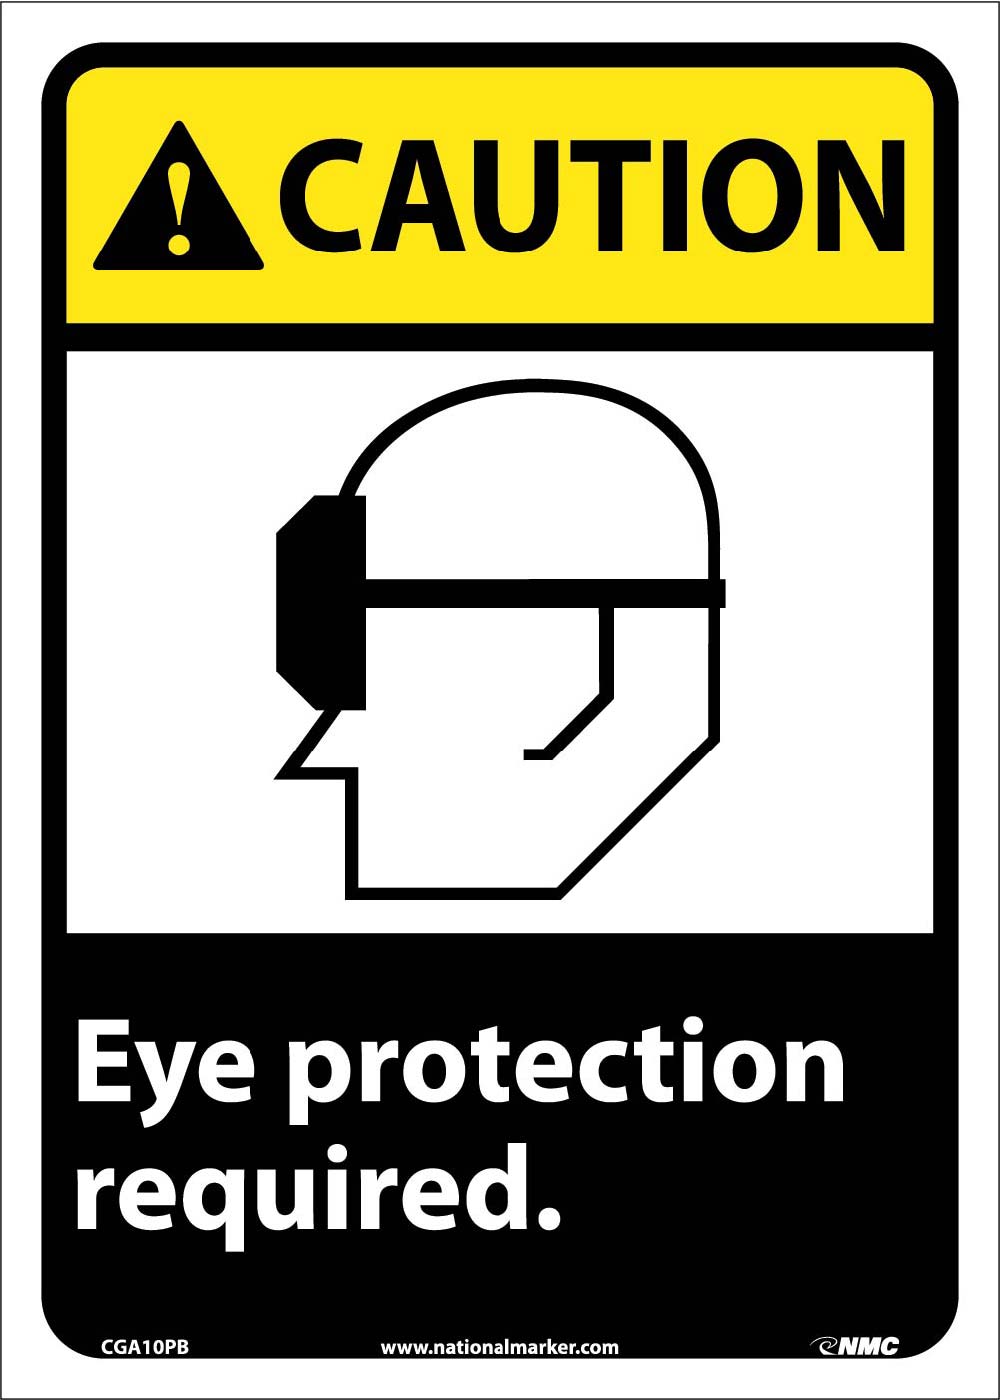 Caution Eye Protection Required Sign-eSafety Supplies, Inc